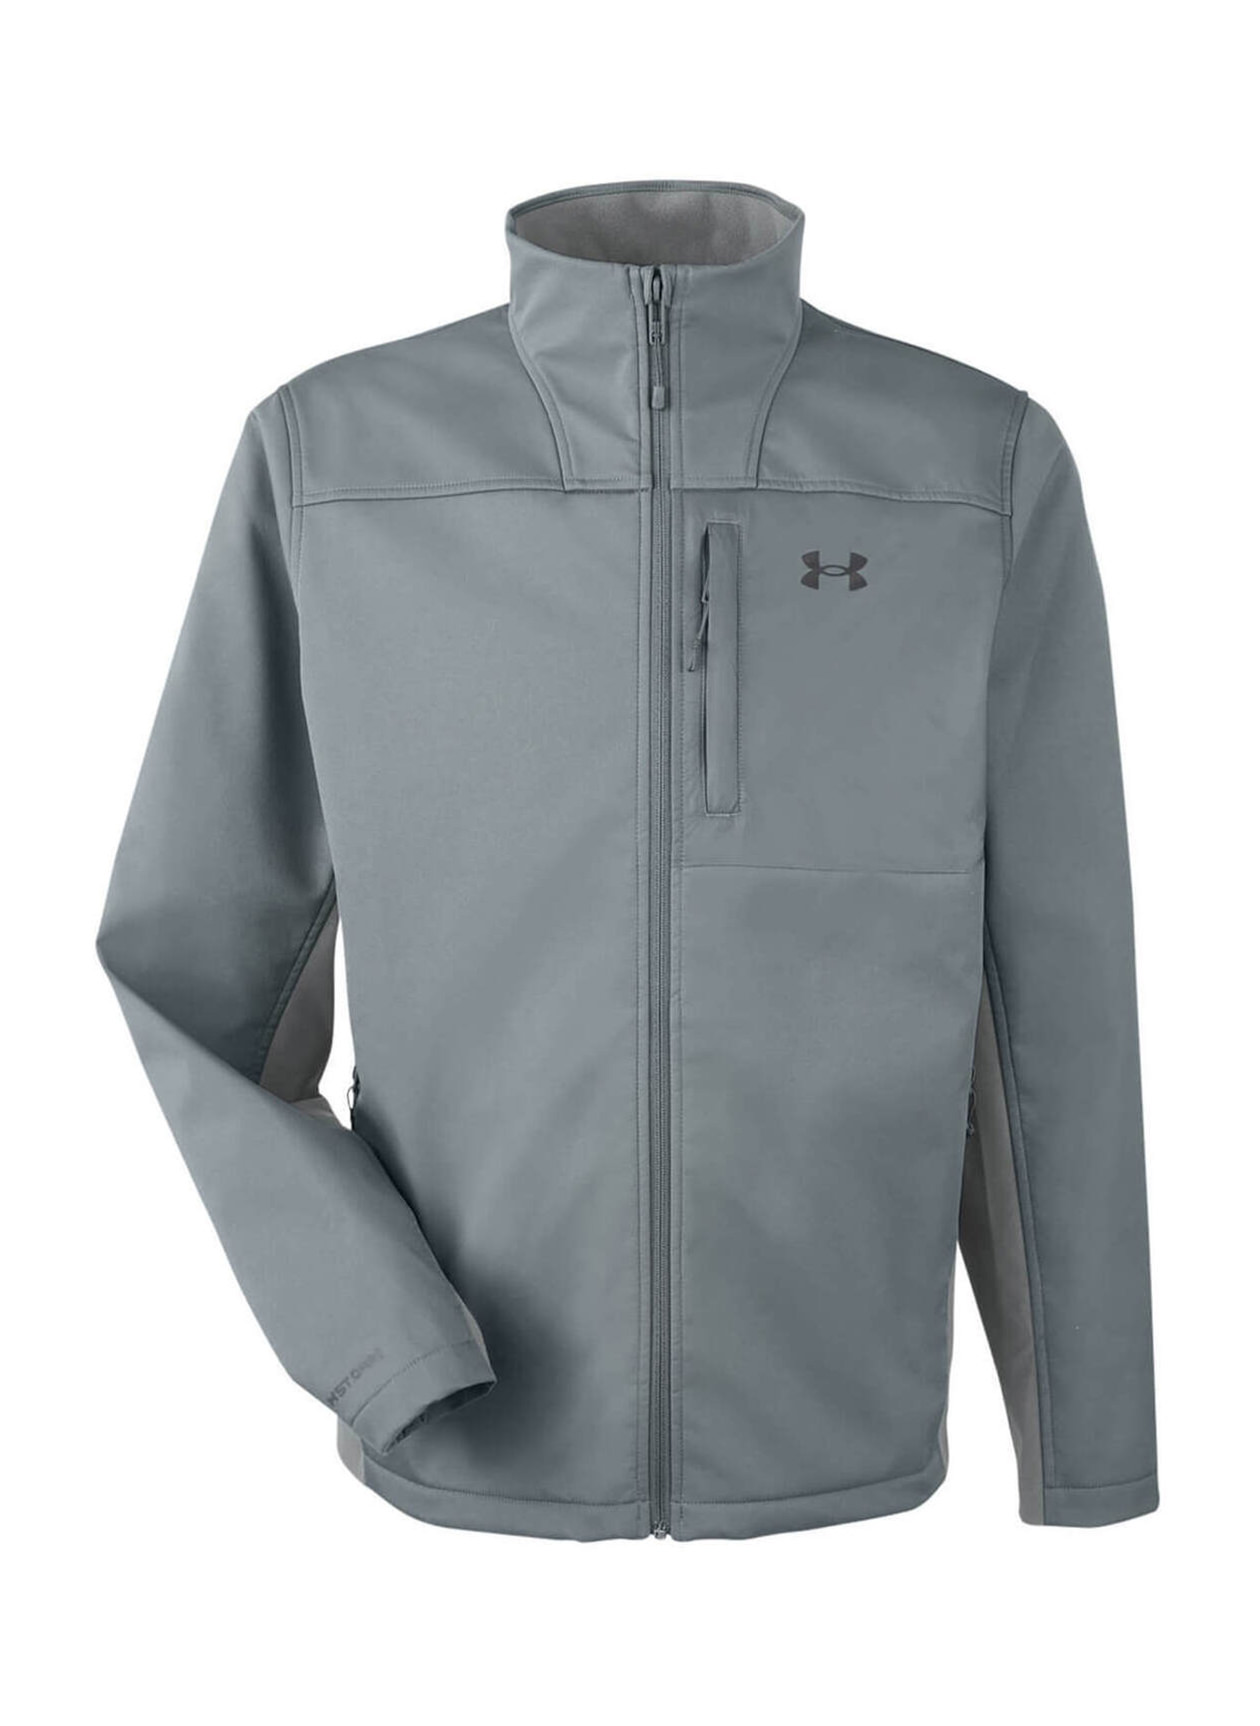 Customized Under Armour Men's Grey ColdGear Infrared Shield 2.0 Jacket